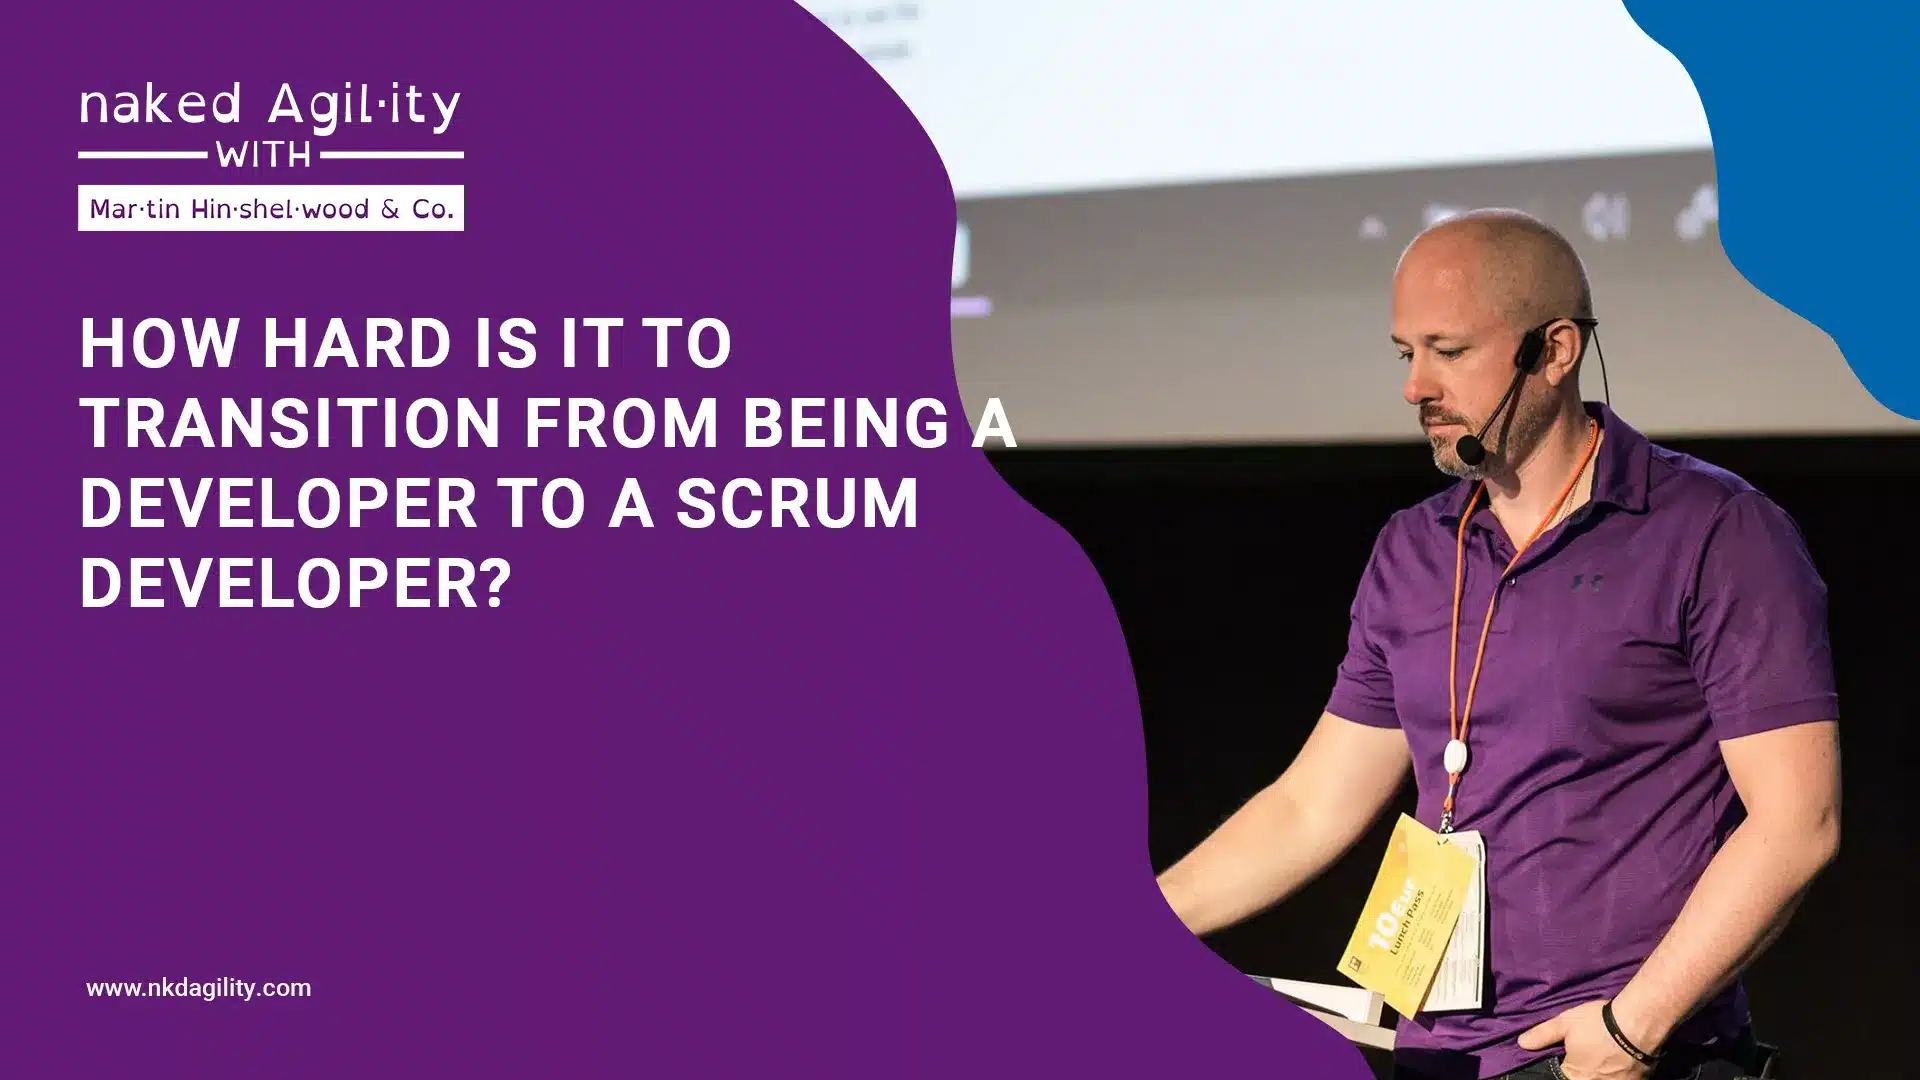 how-hard-is-it-to-transition-from-being-a-developer-to-a-scrum